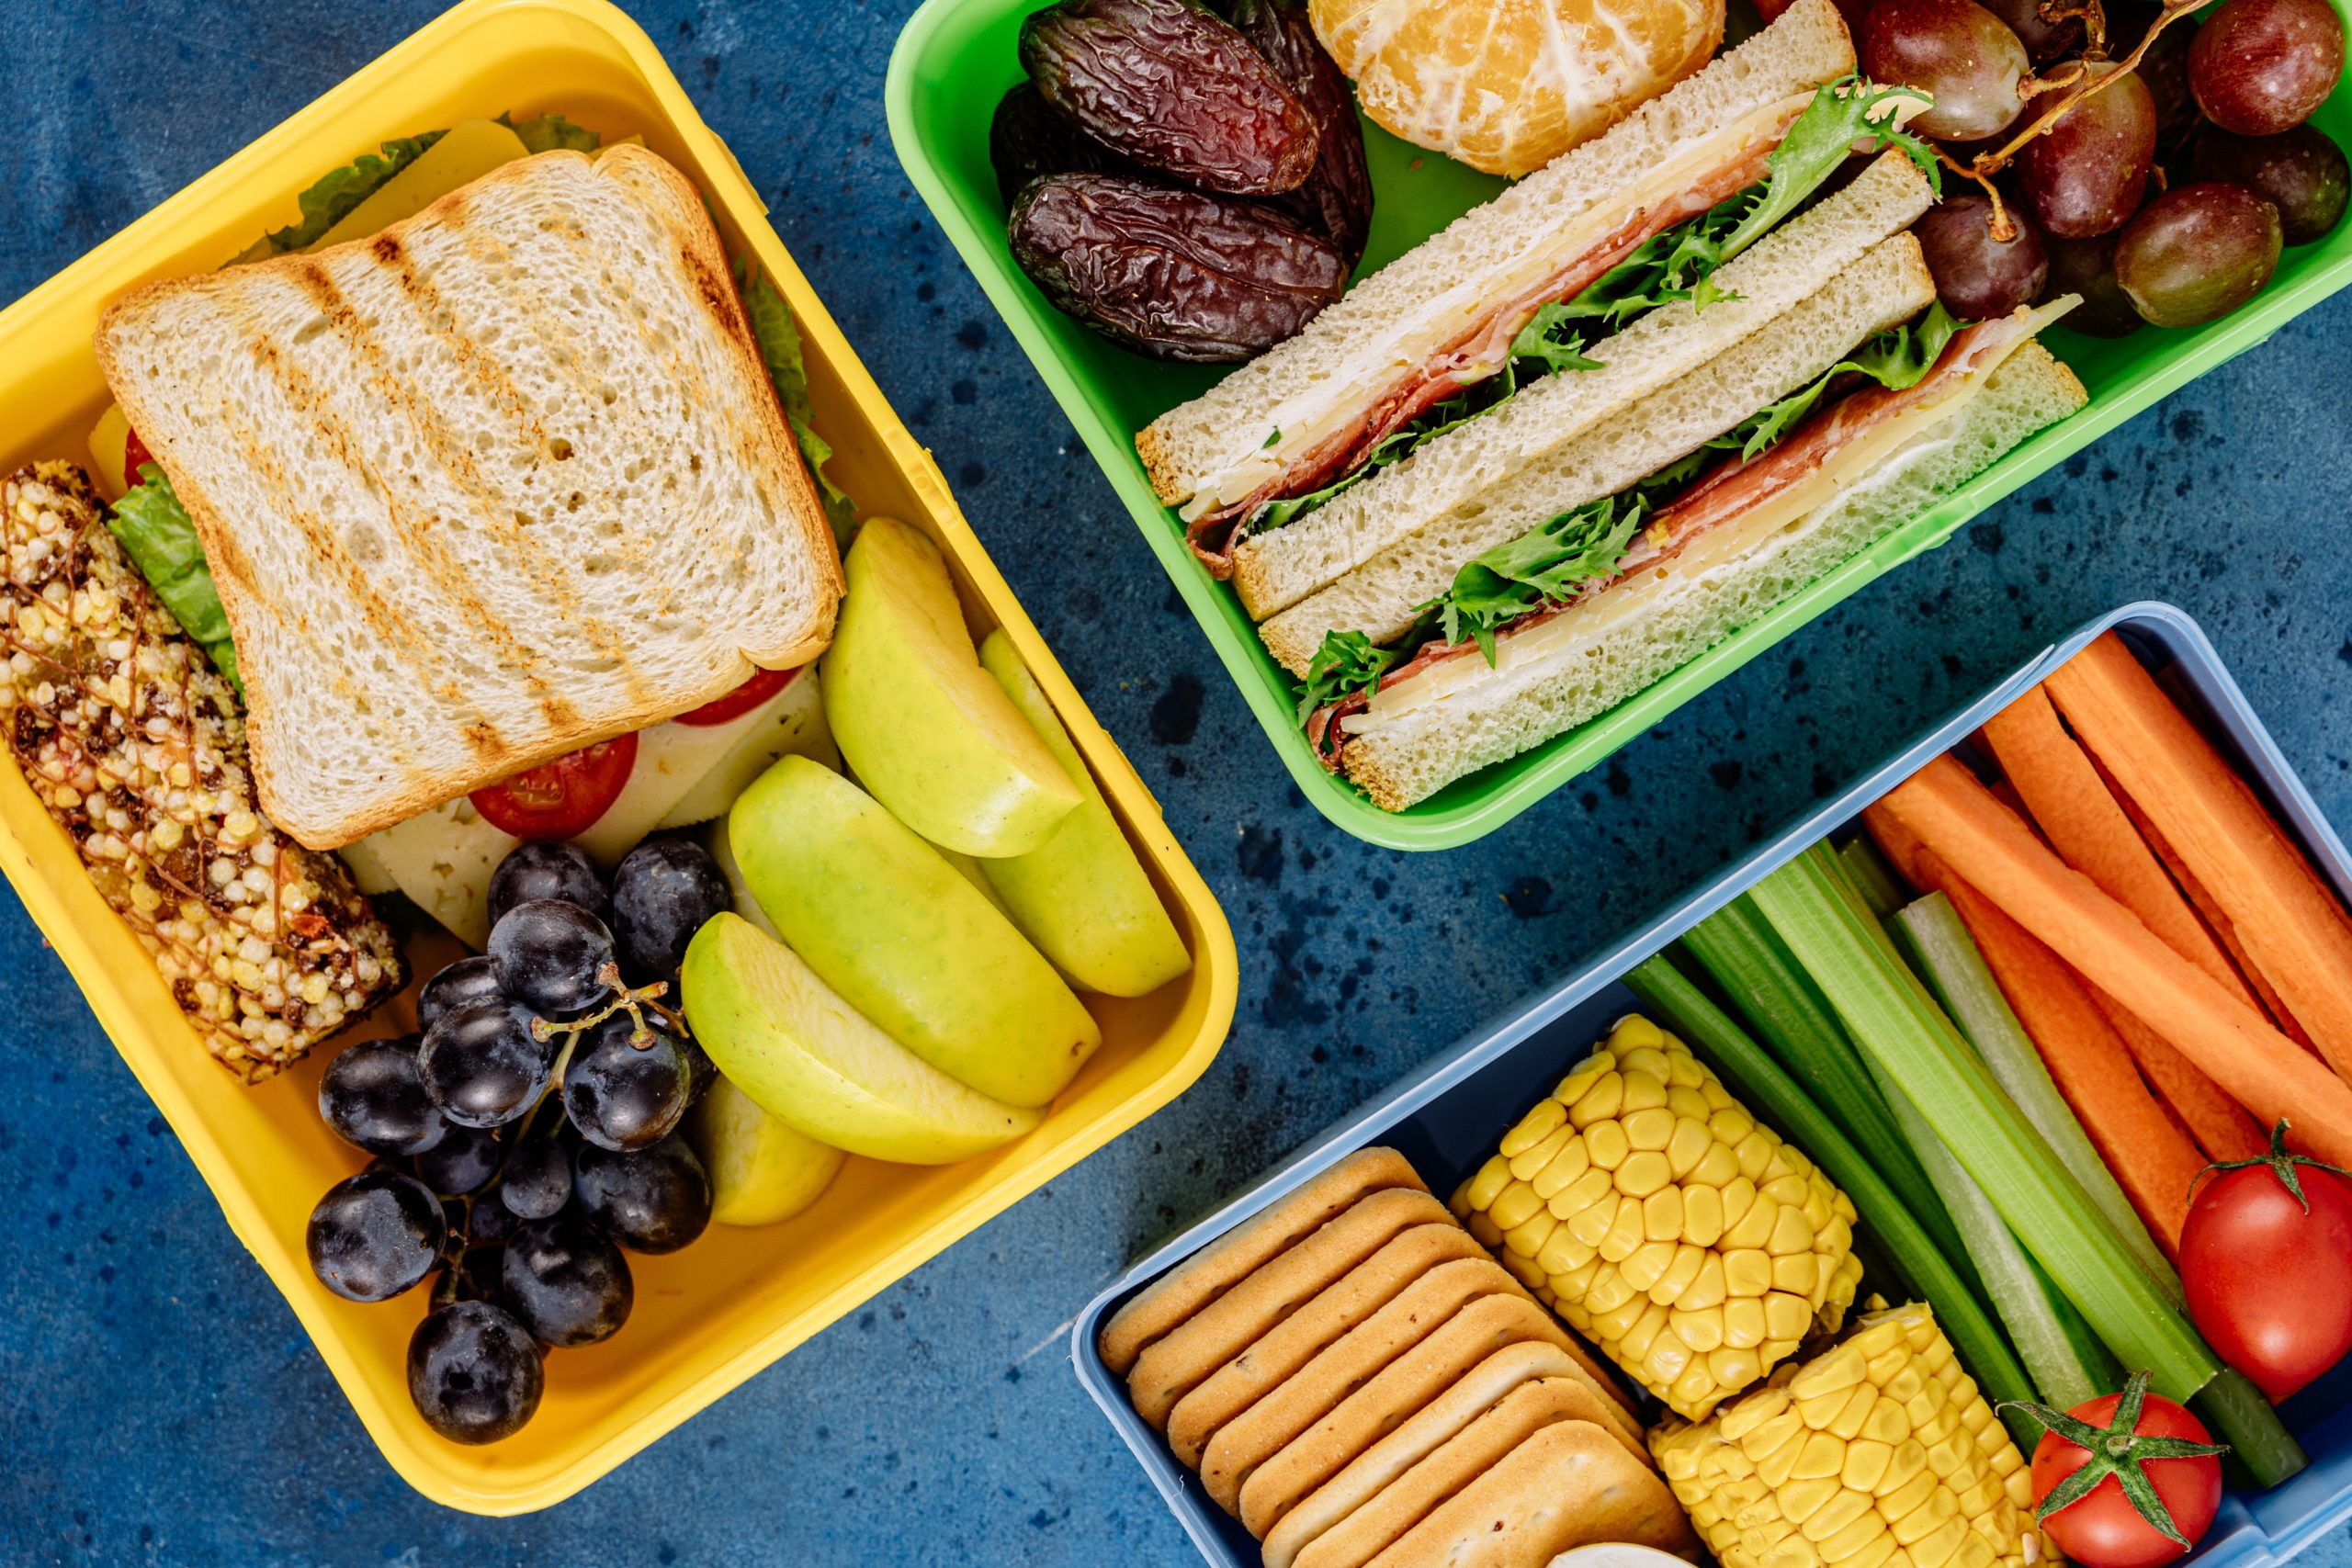 Lunchboxes filled with sandwiches, fruit, vegetables